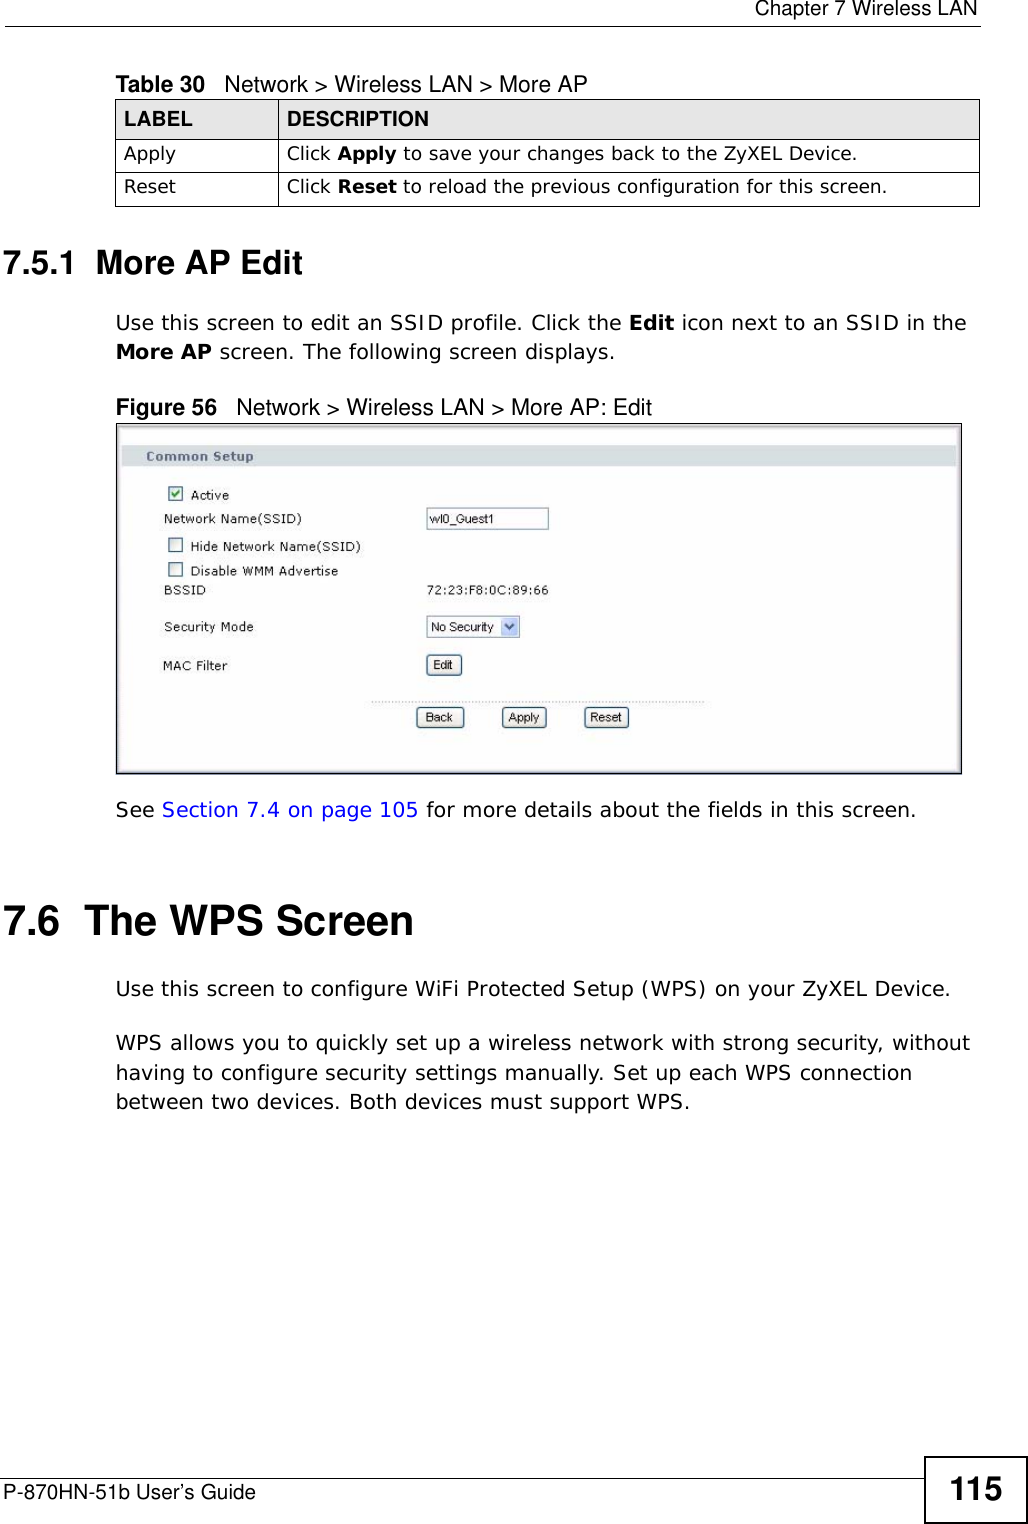  Chapter 7 Wireless LANP-870HN-51b User’s Guide 1157.5.1  More AP EditUse this screen to edit an SSID profile. Click the Edit icon next to an SSID in the More AP screen. The following screen displays.Figure 56   Network &gt; Wireless LAN &gt; More AP: EditSee Section 7.4 on page 105 for more details about the fields in this screen.7.6  The WPS Screen Use this screen to configure WiFi Protected Setup (WPS) on your ZyXEL Device.WPS allows you to quickly set up a wireless network with strong security, without having to configure security settings manually. Set up each WPS connection between two devices. Both devices must support WPS. Apply Click Apply to save your changes back to the ZyXEL Device.Reset Click Reset to reload the previous configuration for this screen.Table 30   Network &gt; Wireless LAN &gt; More APLABEL DESCRIPTION